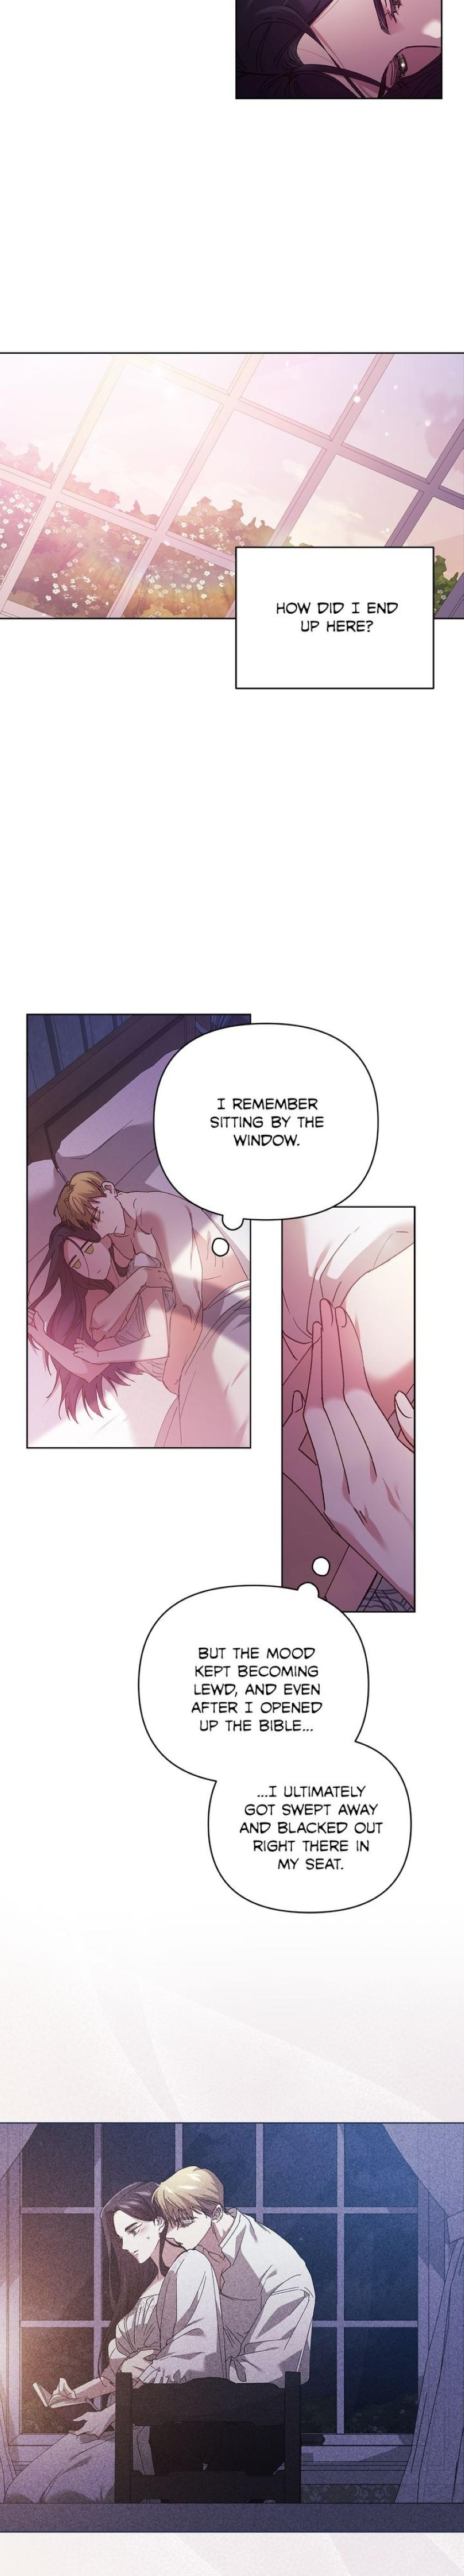 This marriage is bound to fail. The broken Ring this marriage will fail anyway Manga. Манхва broken Ring this marriage. Manhwa broken Ring. This marriage is bound to fail anyway manhwa.